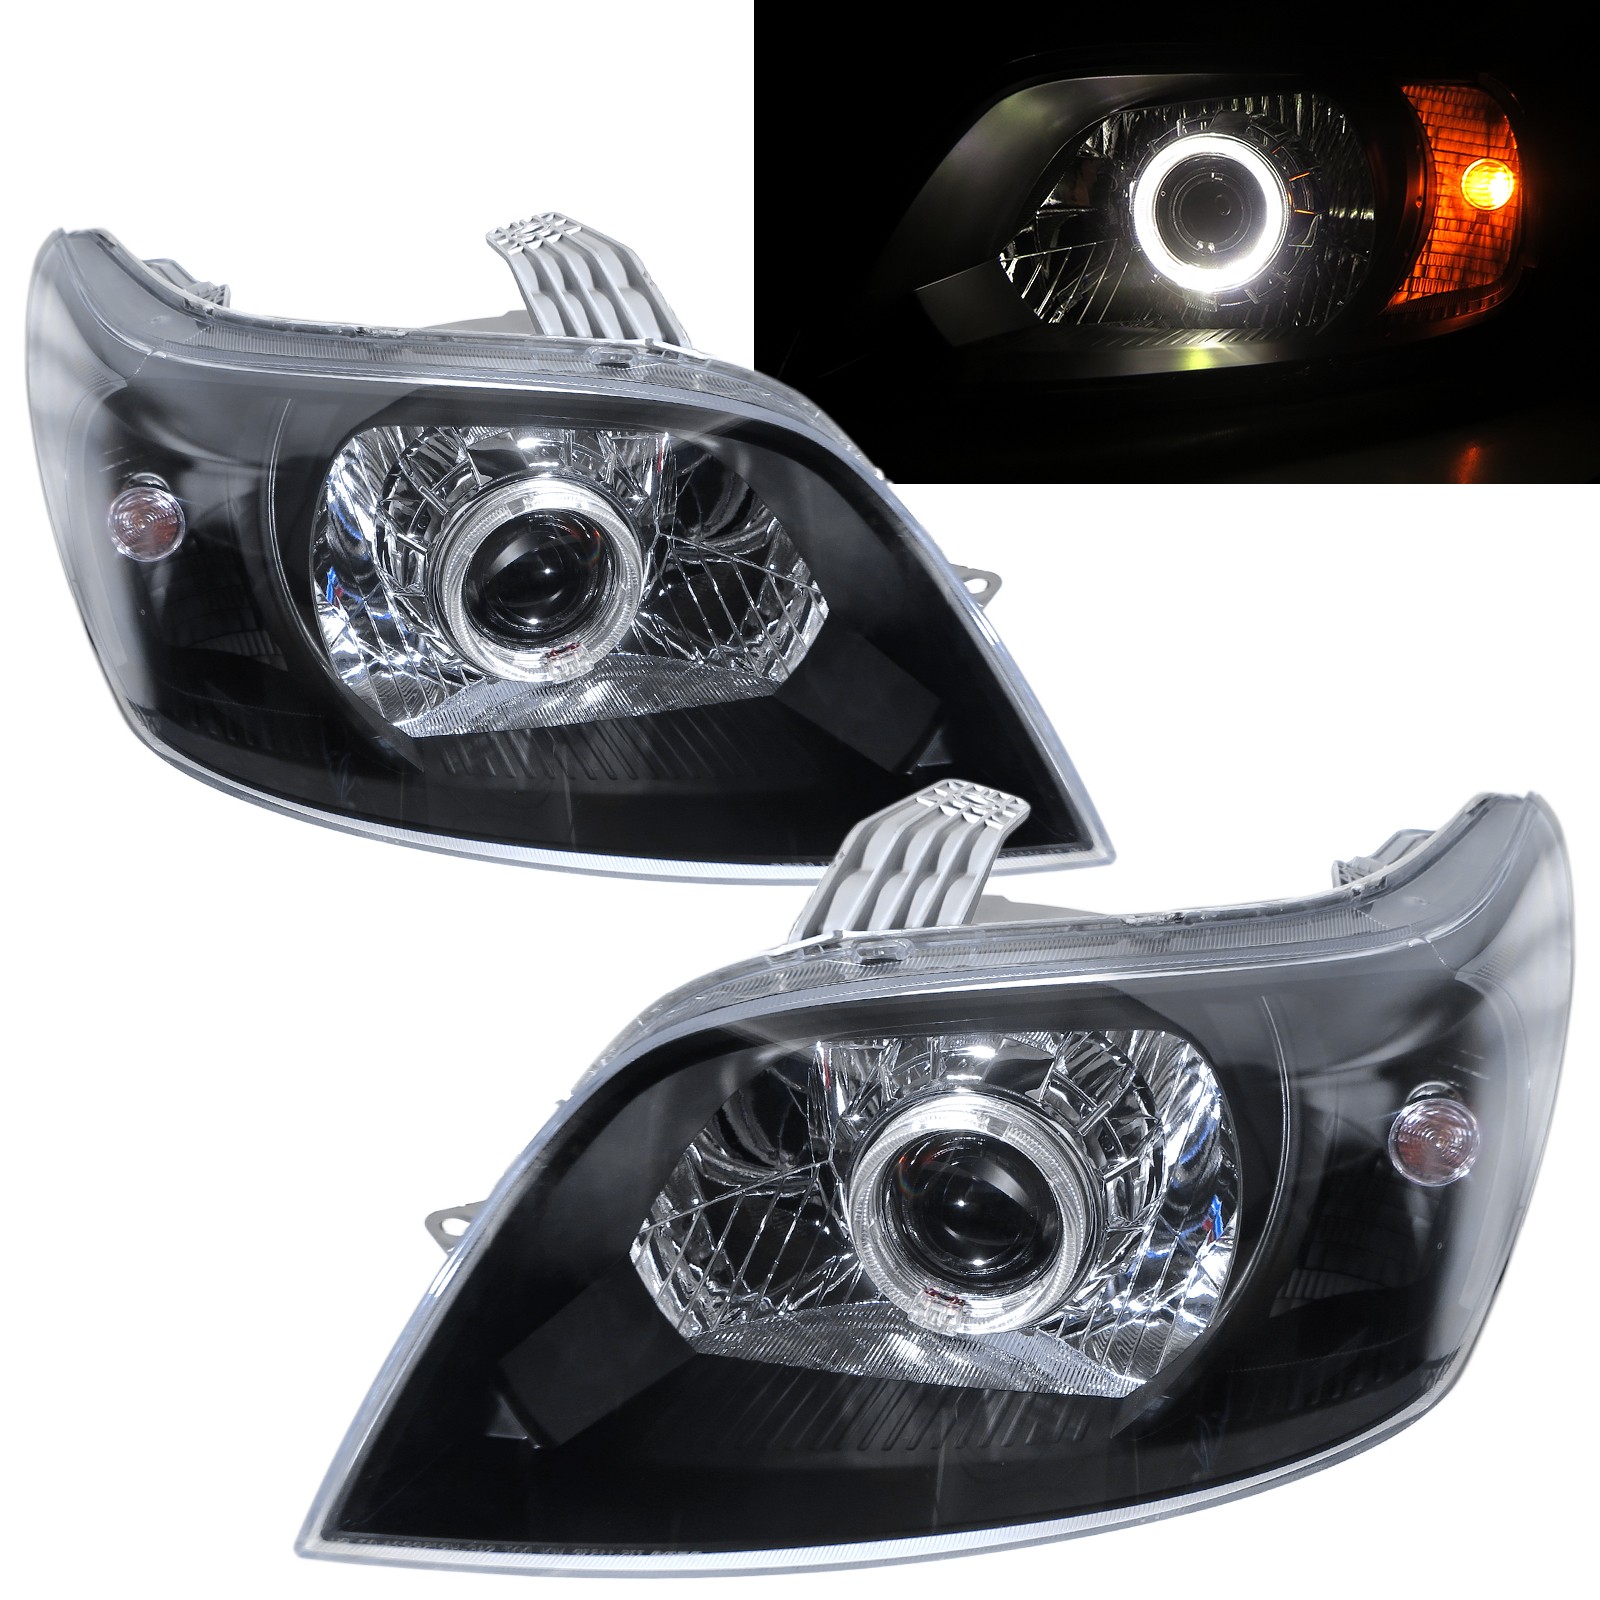 CrazyTheGod Aveo T250 First generation 2009-2011 FACELIFT Hatchback 3D/5D Guide LED Angle-Eye Projector Headlight Headlamp Black US for CHEVROLET CHEVY LHD